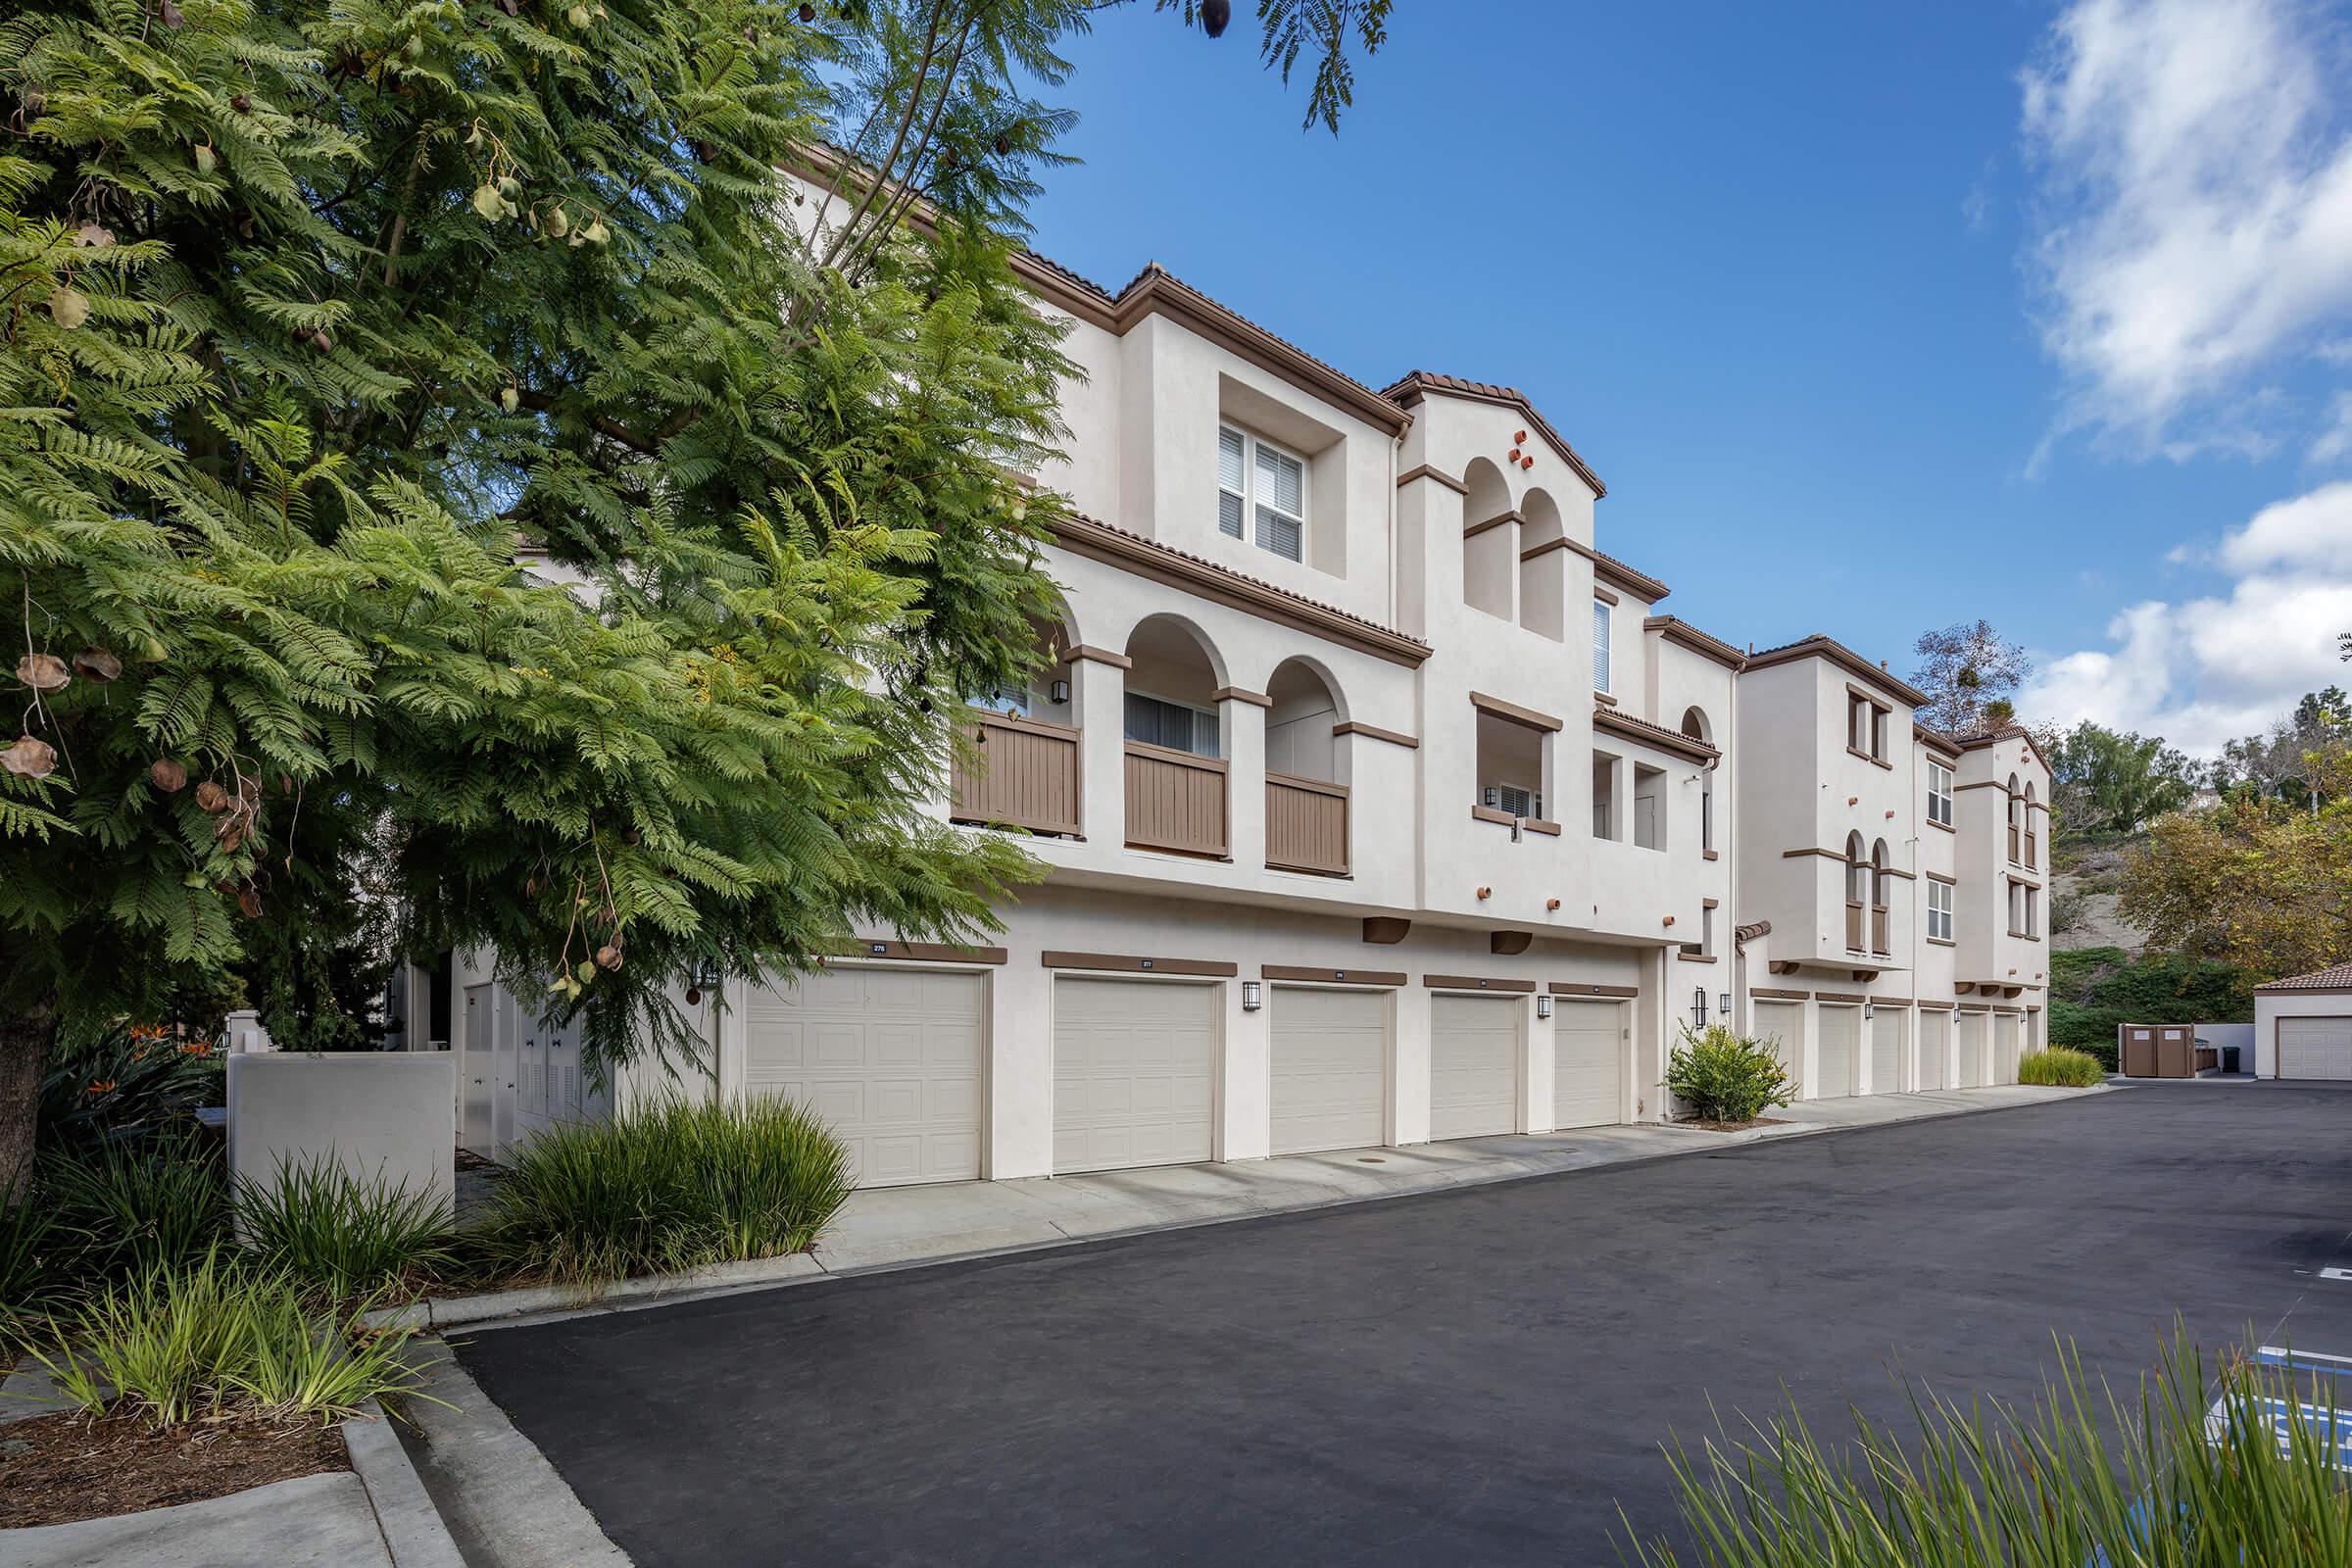 Ladera Ranch, CA, Apartments for rent